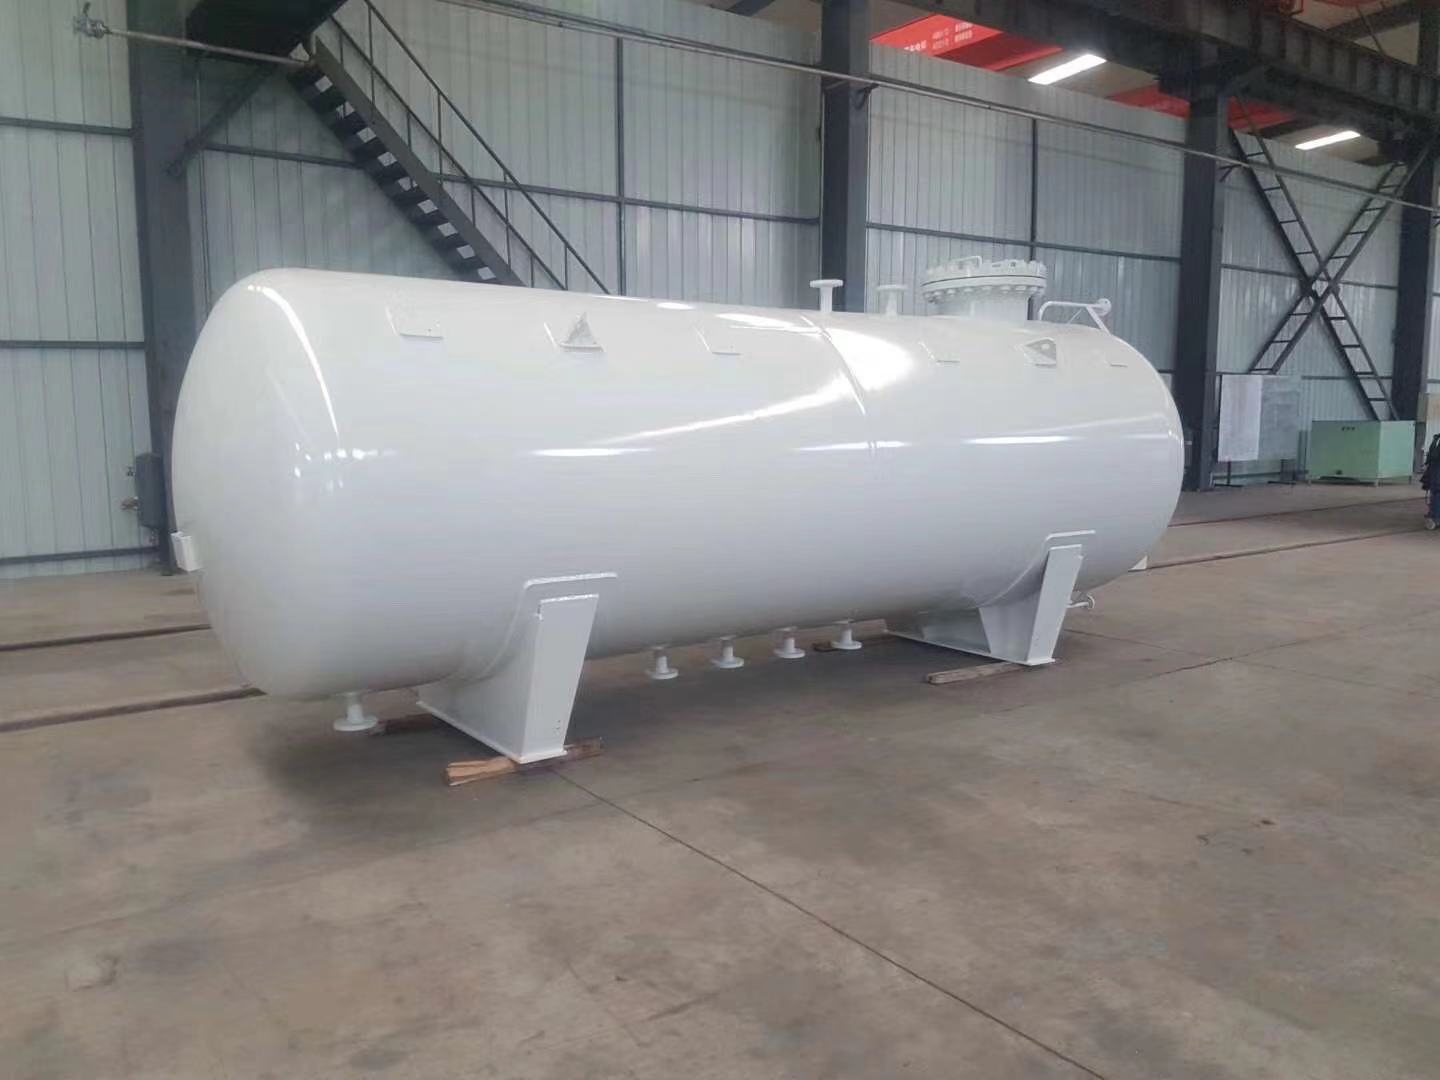 LPG storage tanks for commercial and industrial use